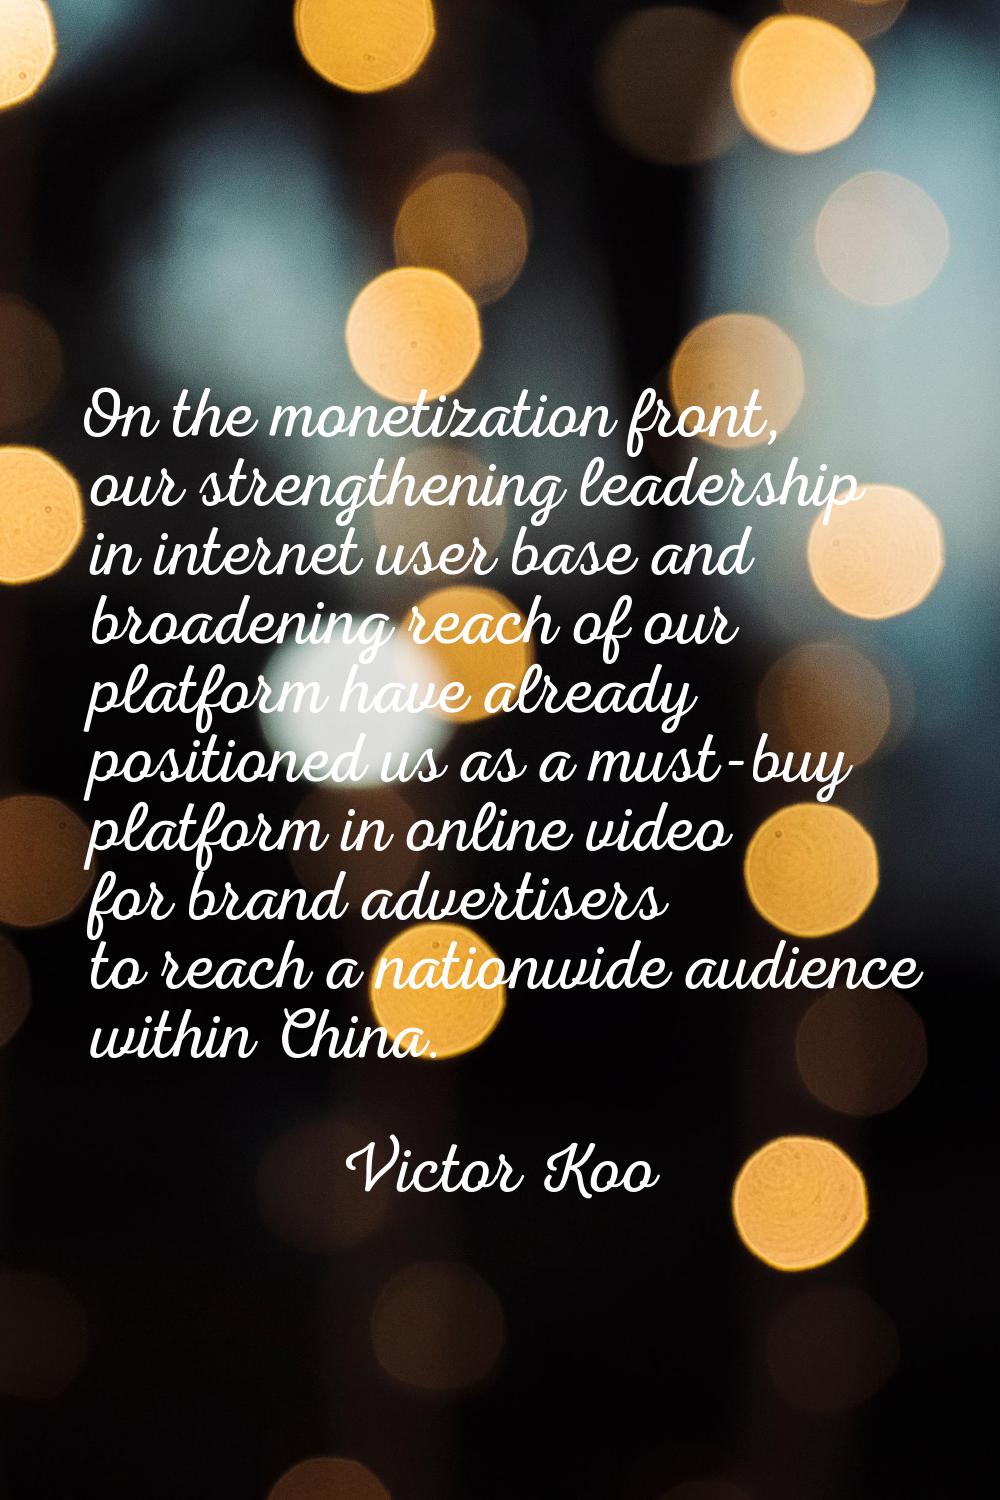 On the monetization front, our strengthening leadership in internet user base and broadening reach 